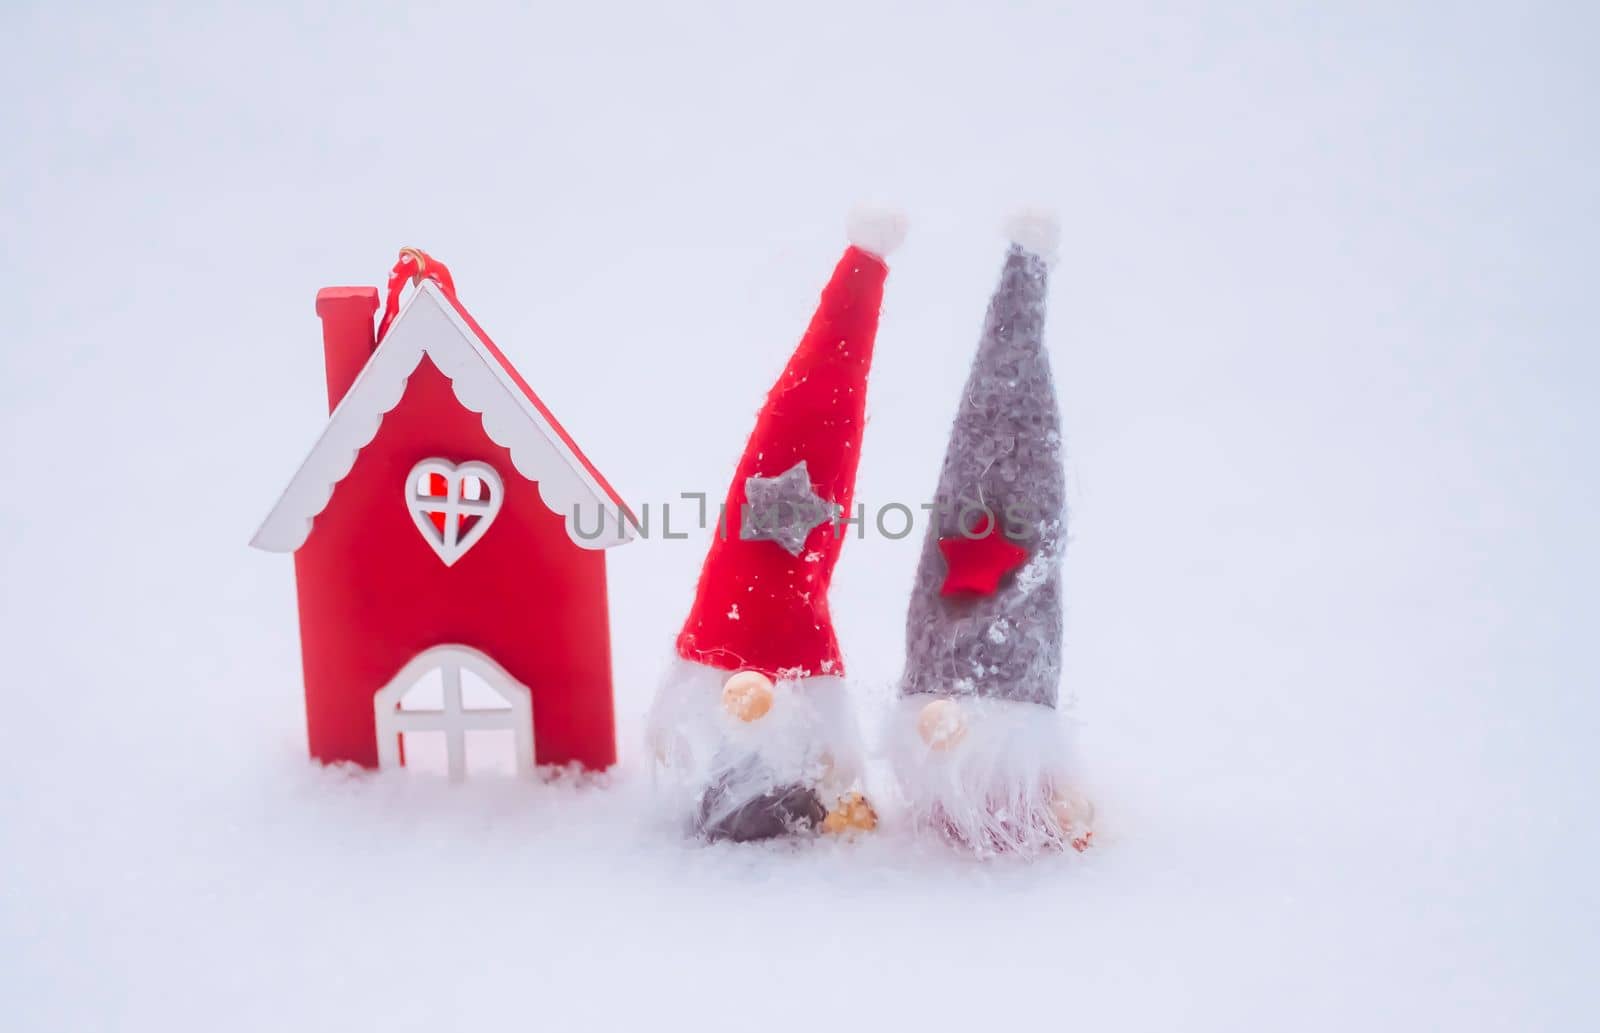 Cute gnomes in red hat and wooden house. Decorative Christmas toys by nightlyviolet